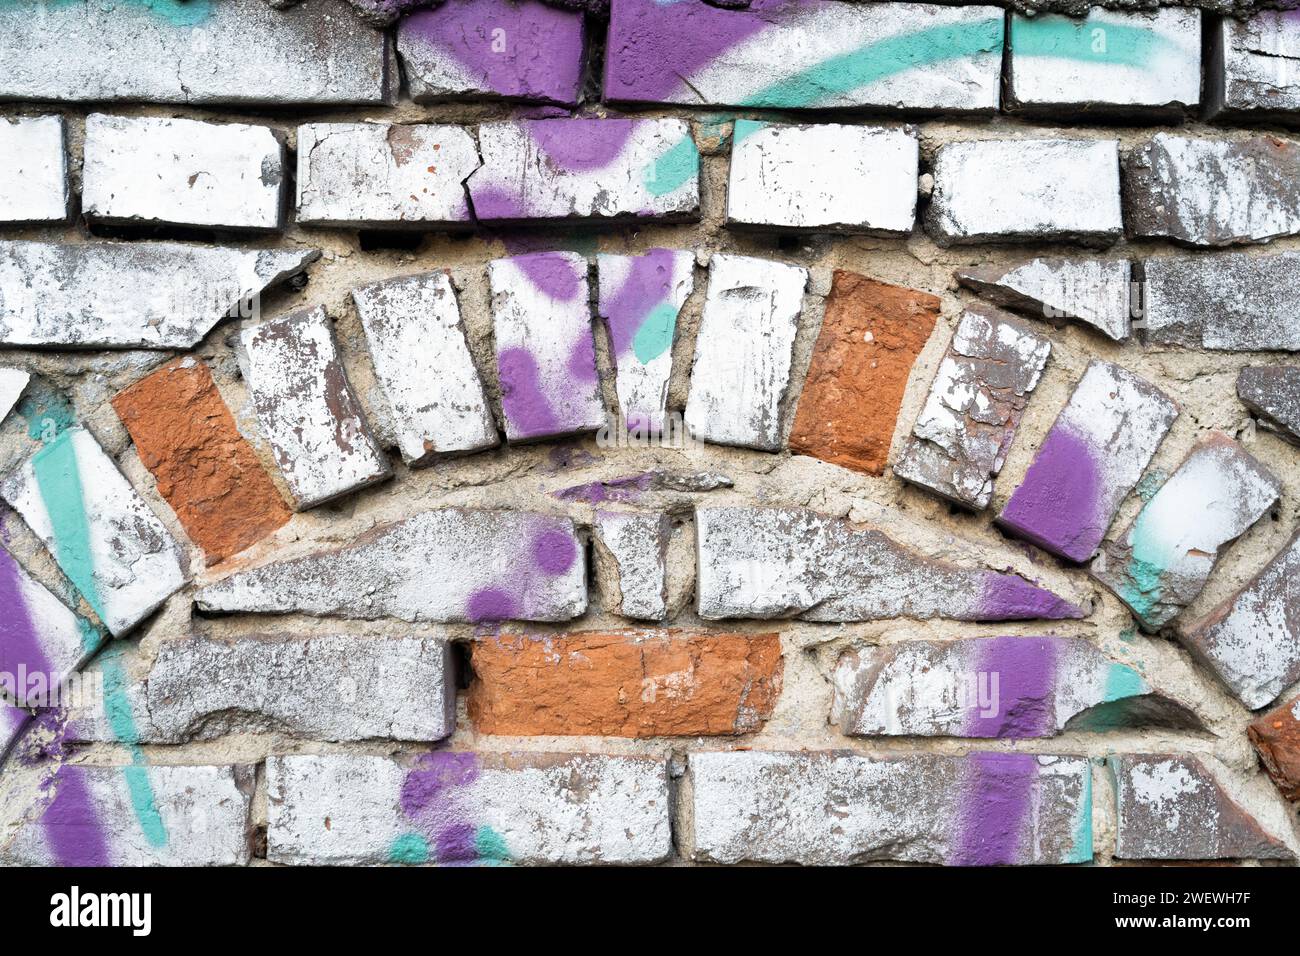 Colorful orange white purple paint on brick old wall background with half circle pattern that inspire equilibrium and joy Stock Photo